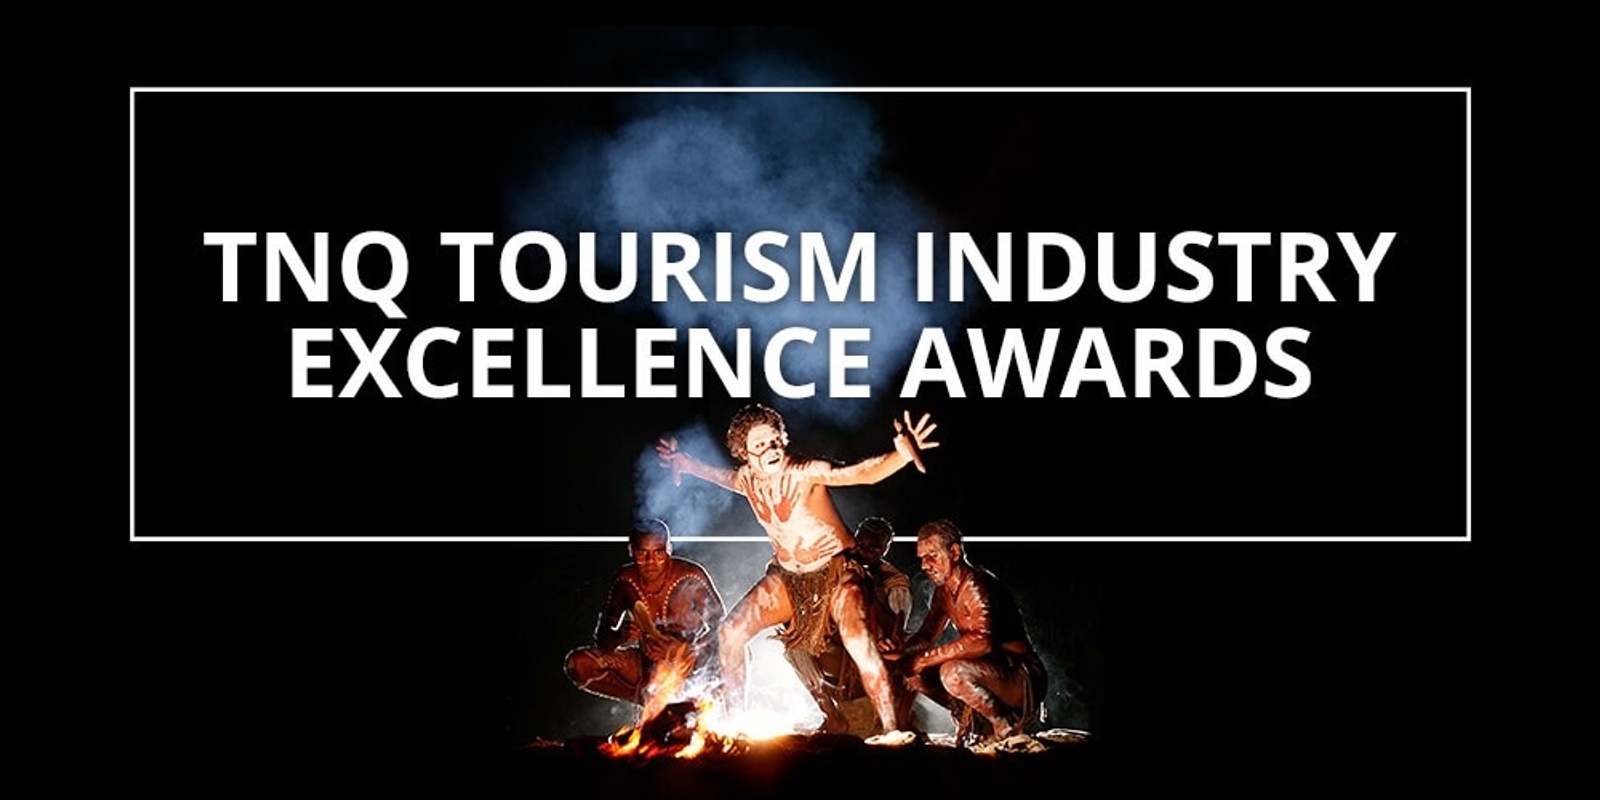 tnq tourism industry excellence awards